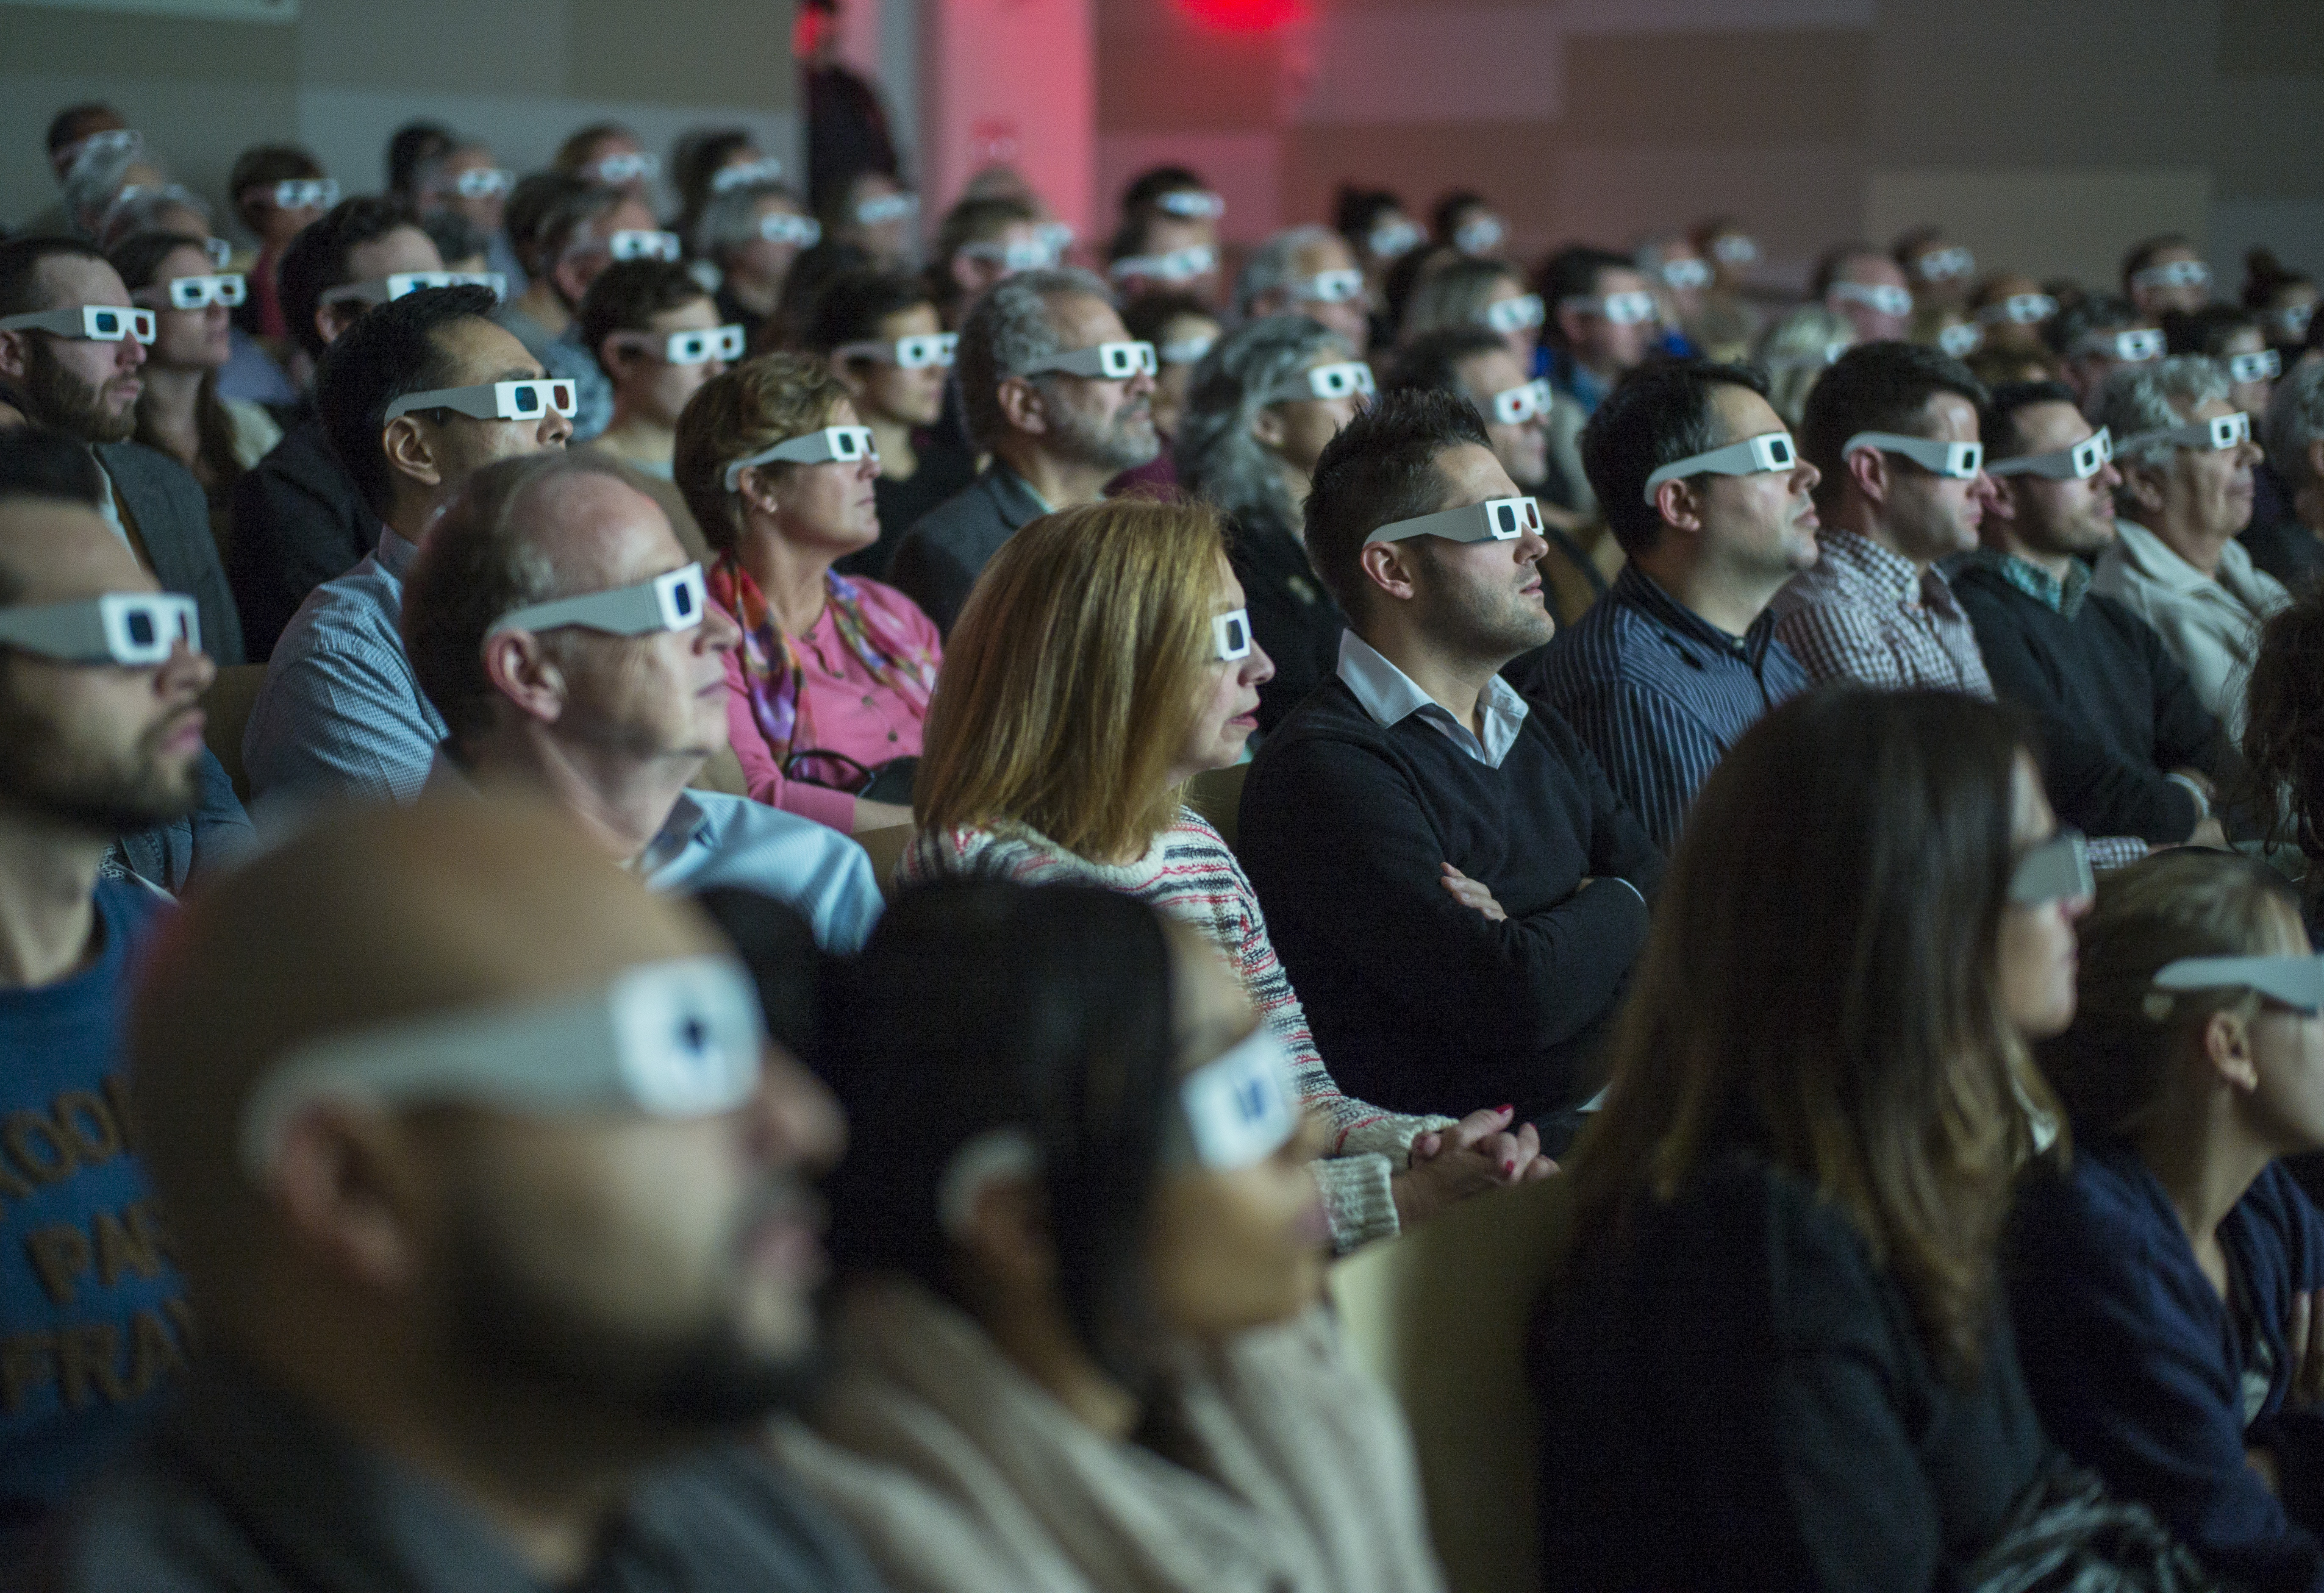 Public program attendees view a 3D video sculpture out of view at the Museum Auditorium. The dozens of audience members are wearing white 3D glasses with red and blue lenses.